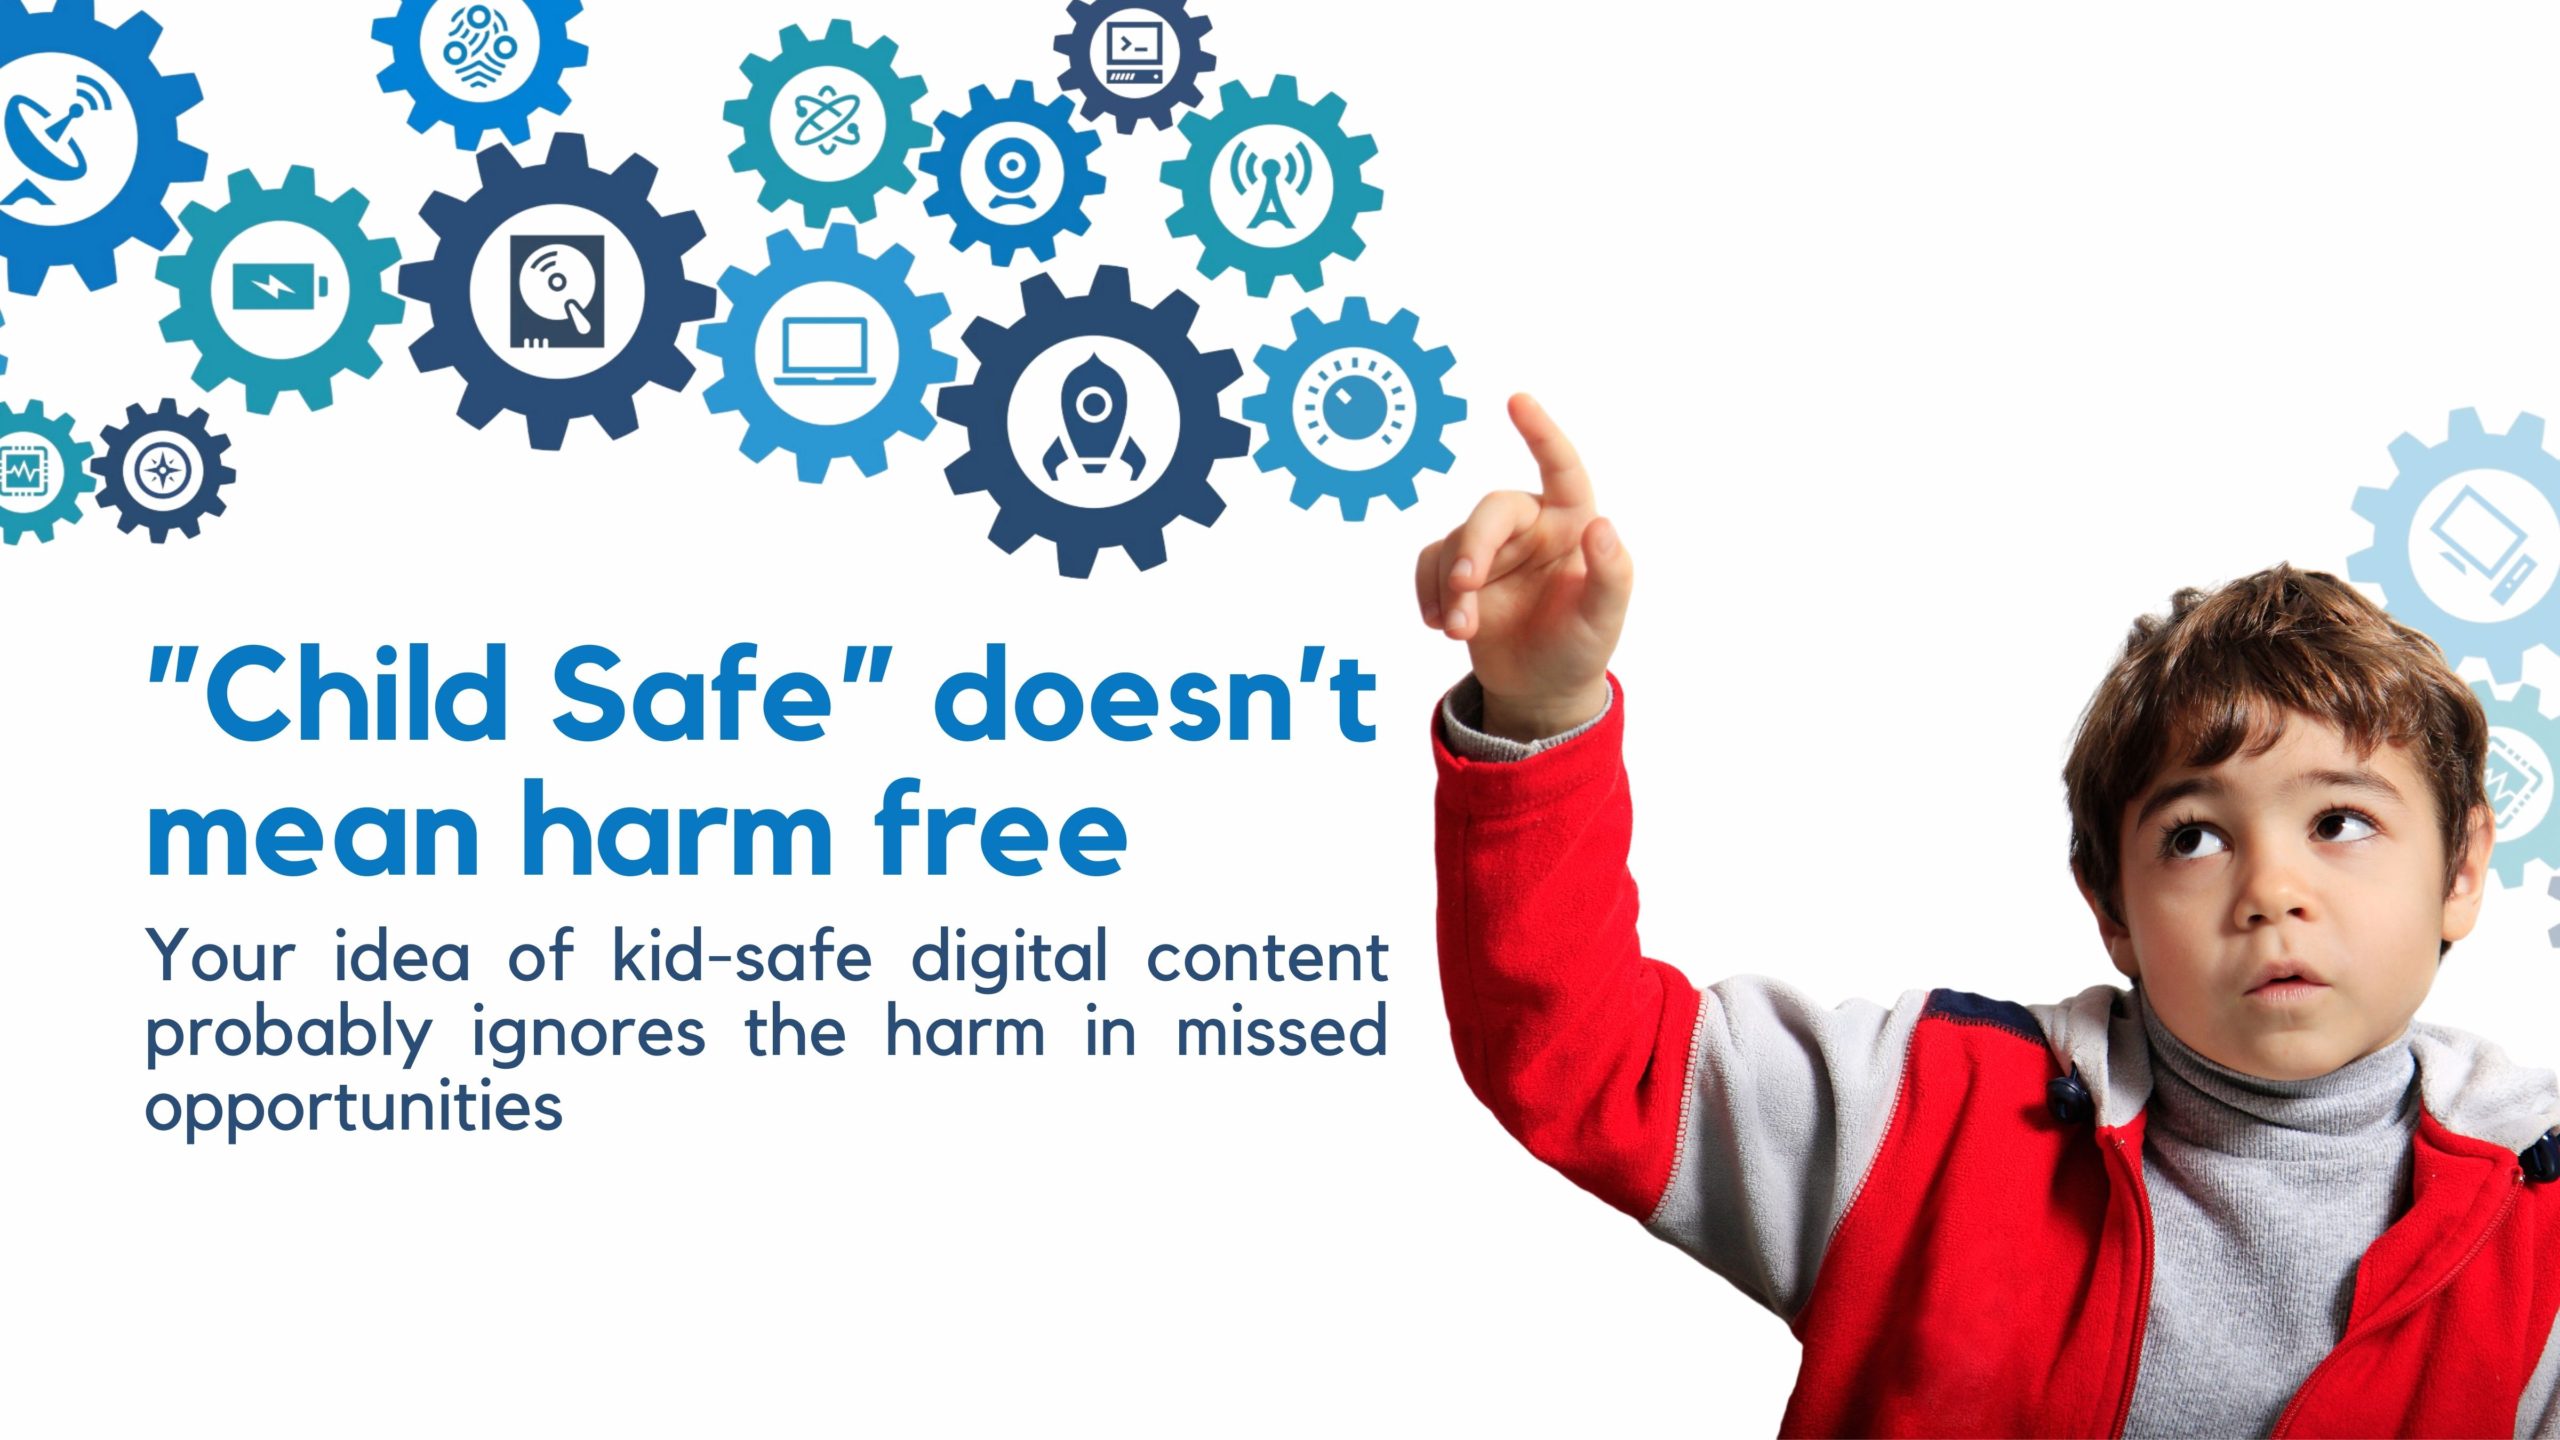 “Child Safe” content can still be harmful to kids